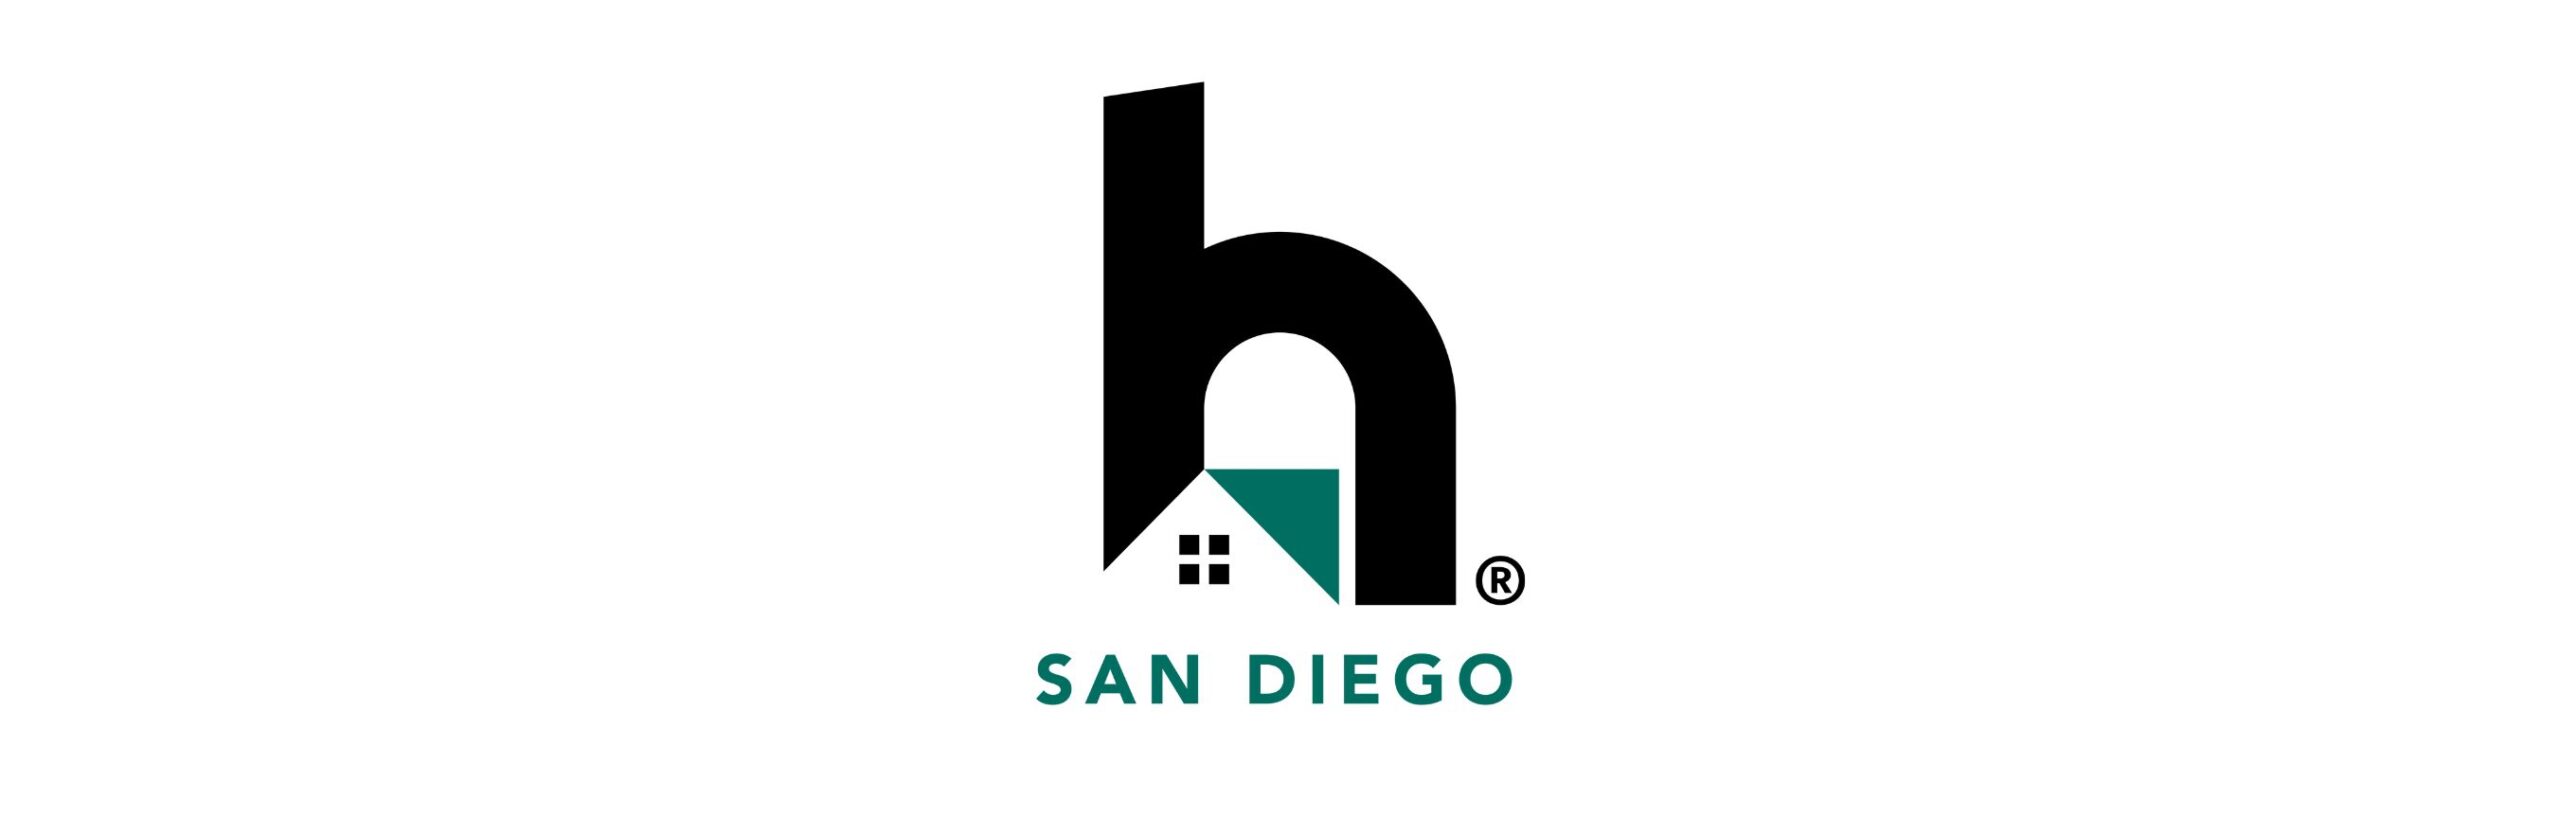 san-diego-residential-construction-job-fair-offers-exciting-job-opportunities